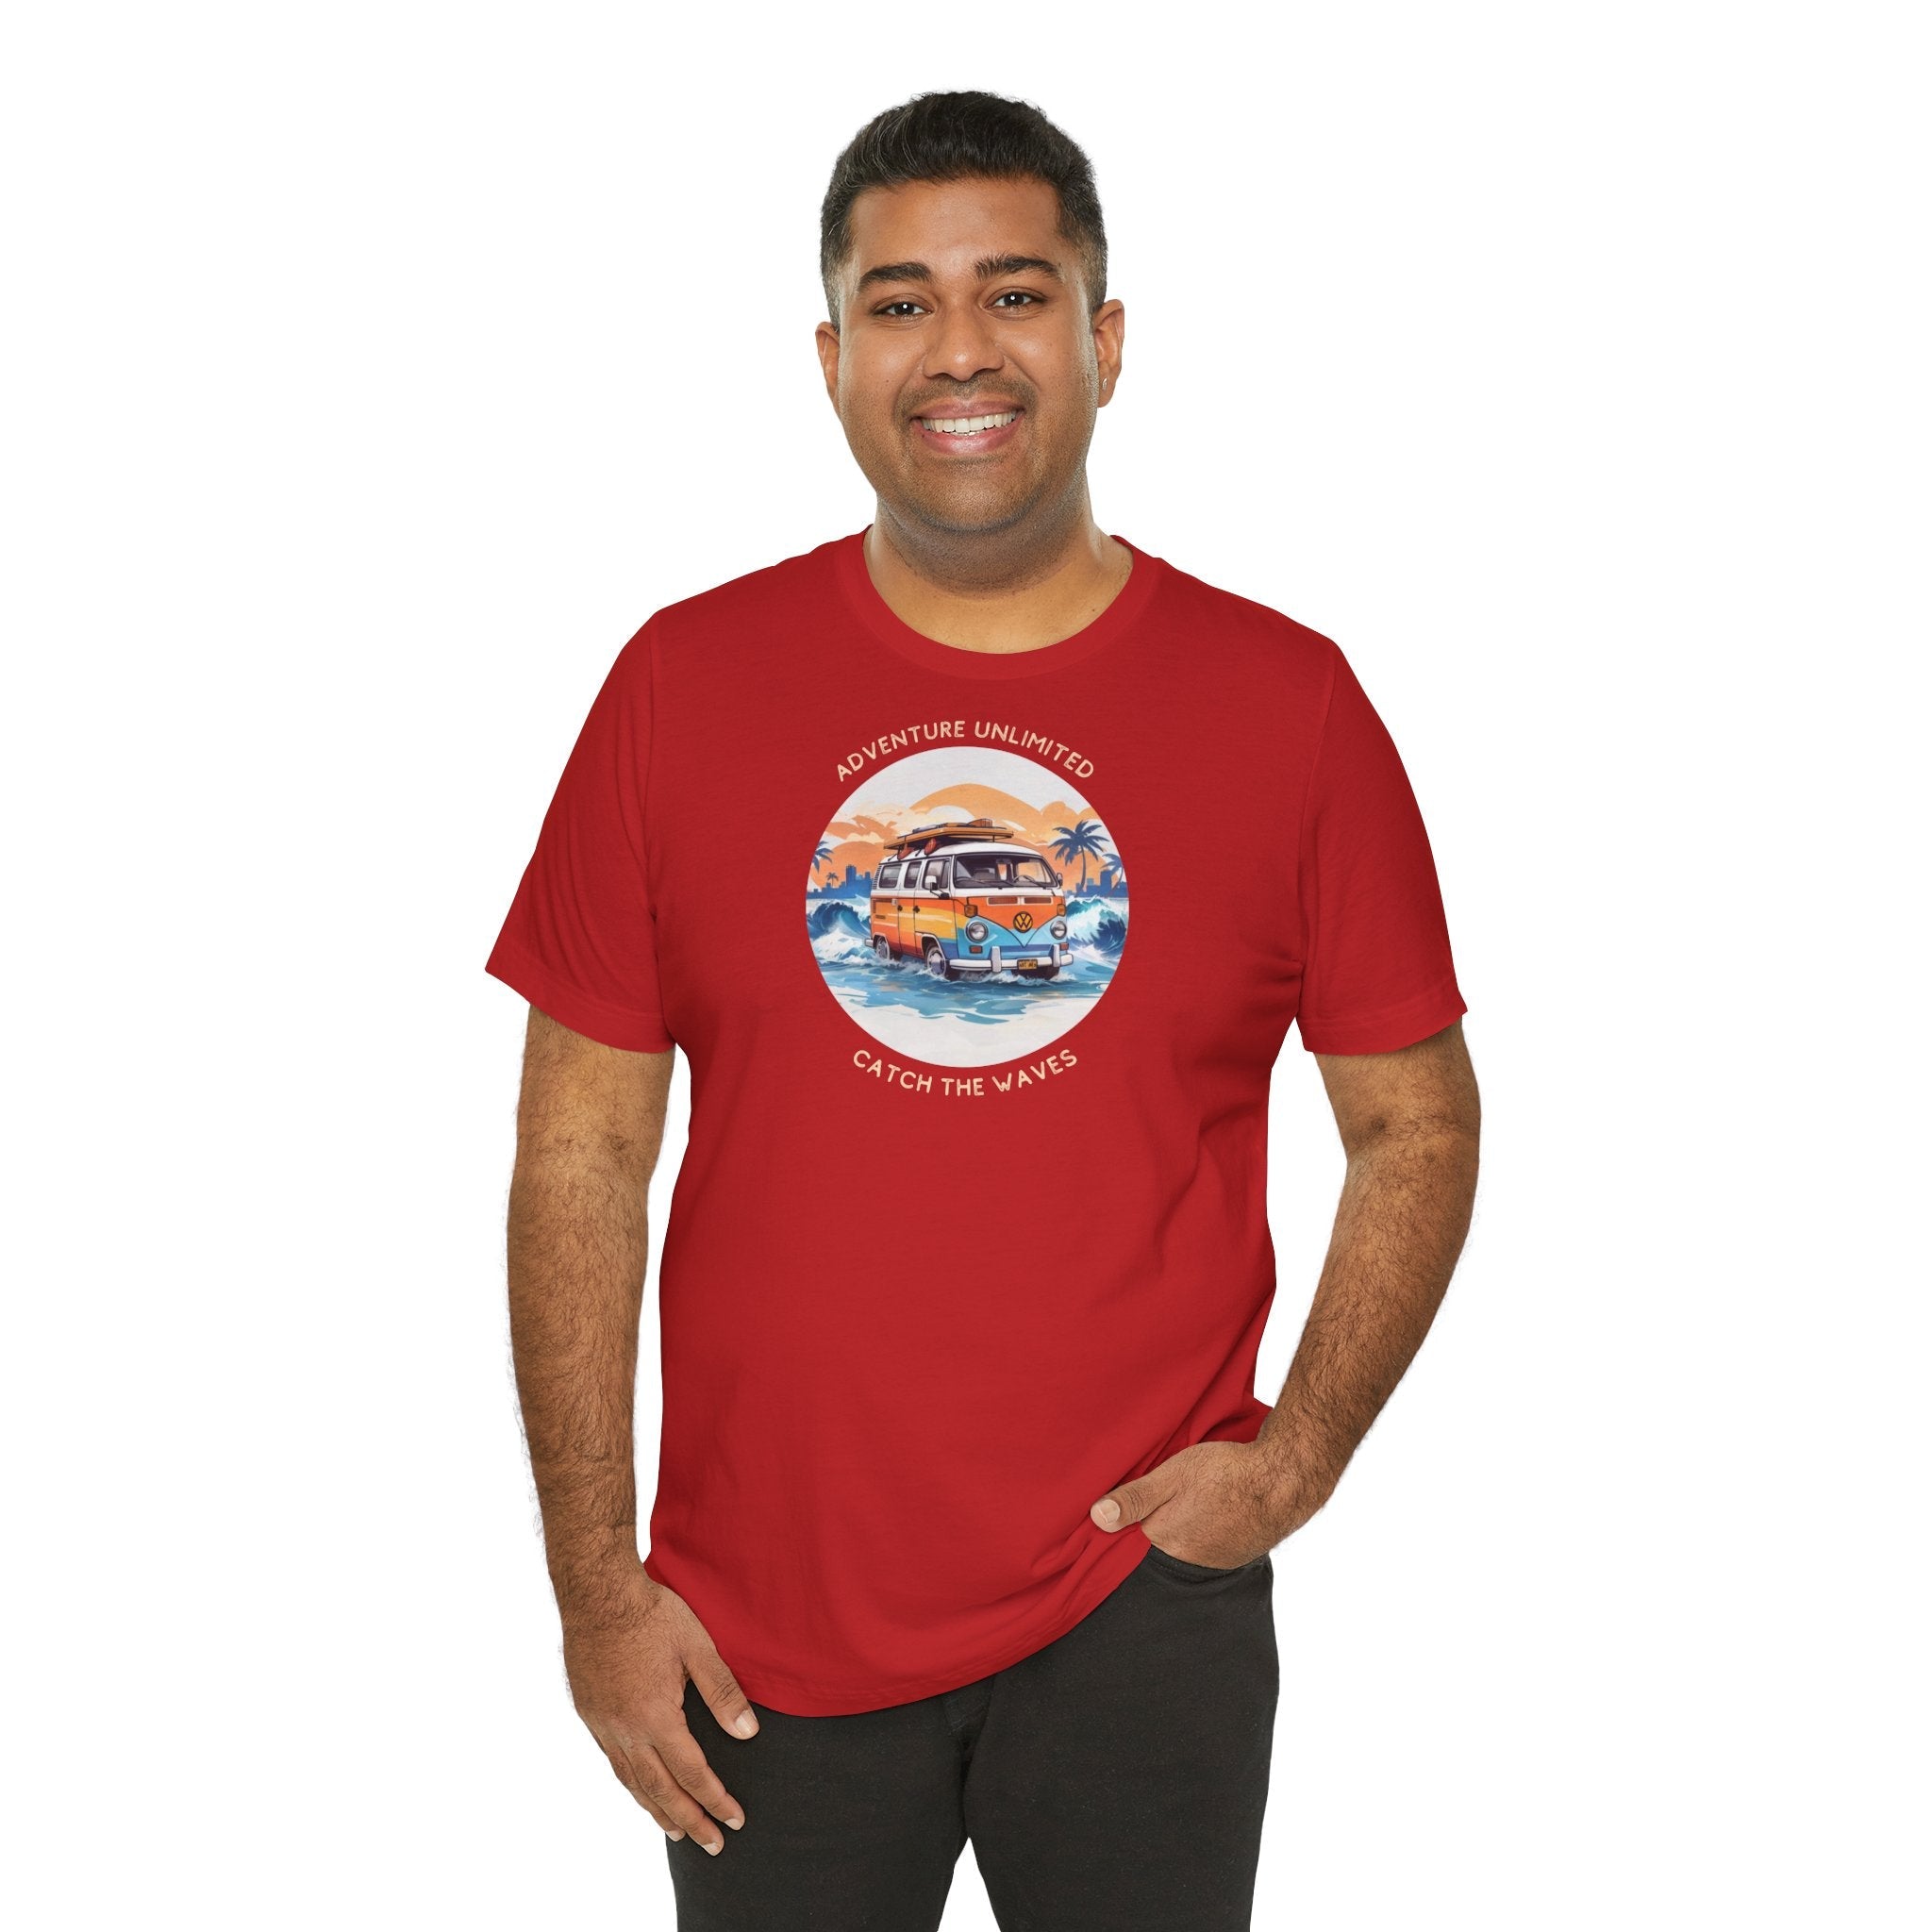 Man wearing red direct-to-garment printed t-shirt with quote ’on it’ from Adventure Unlimited Soulshinecreators